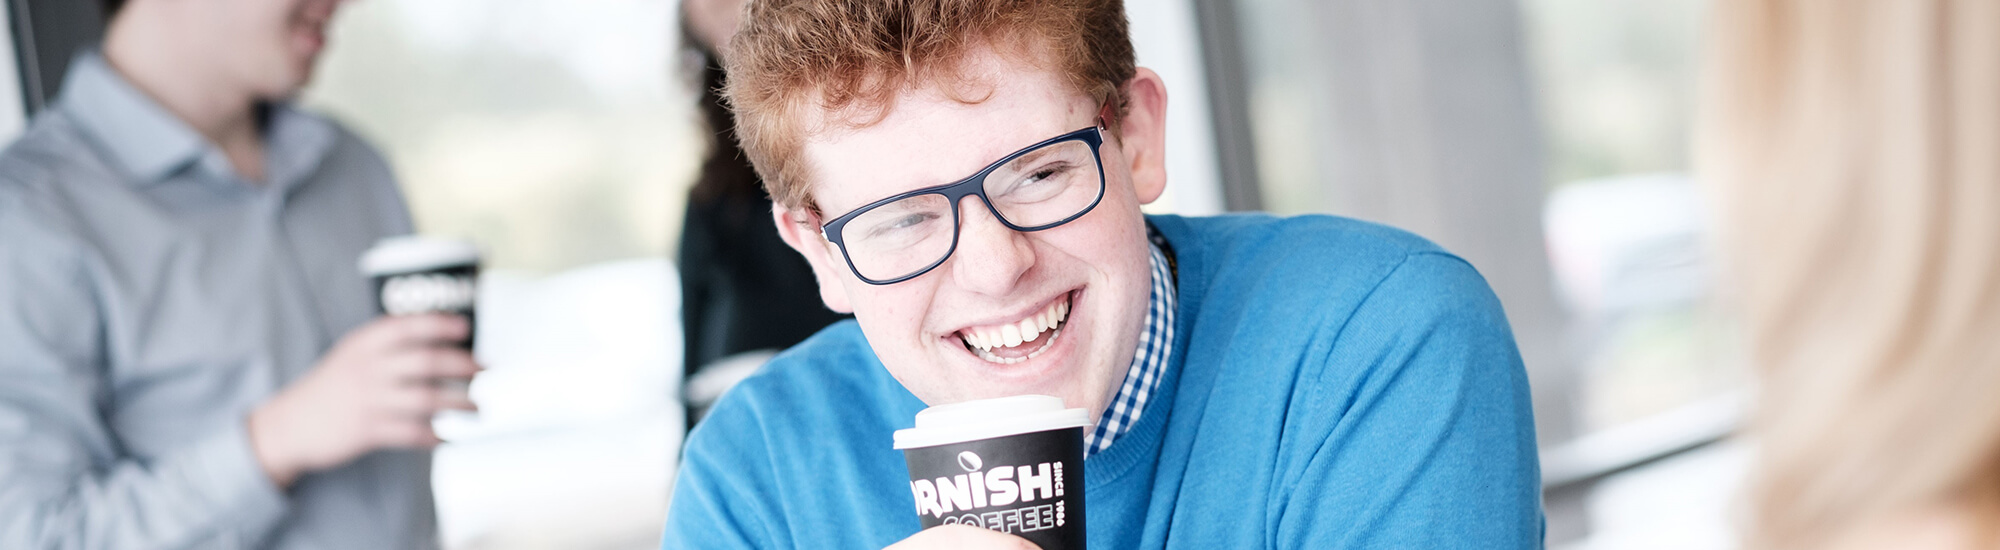 Person smiling drinking coffee